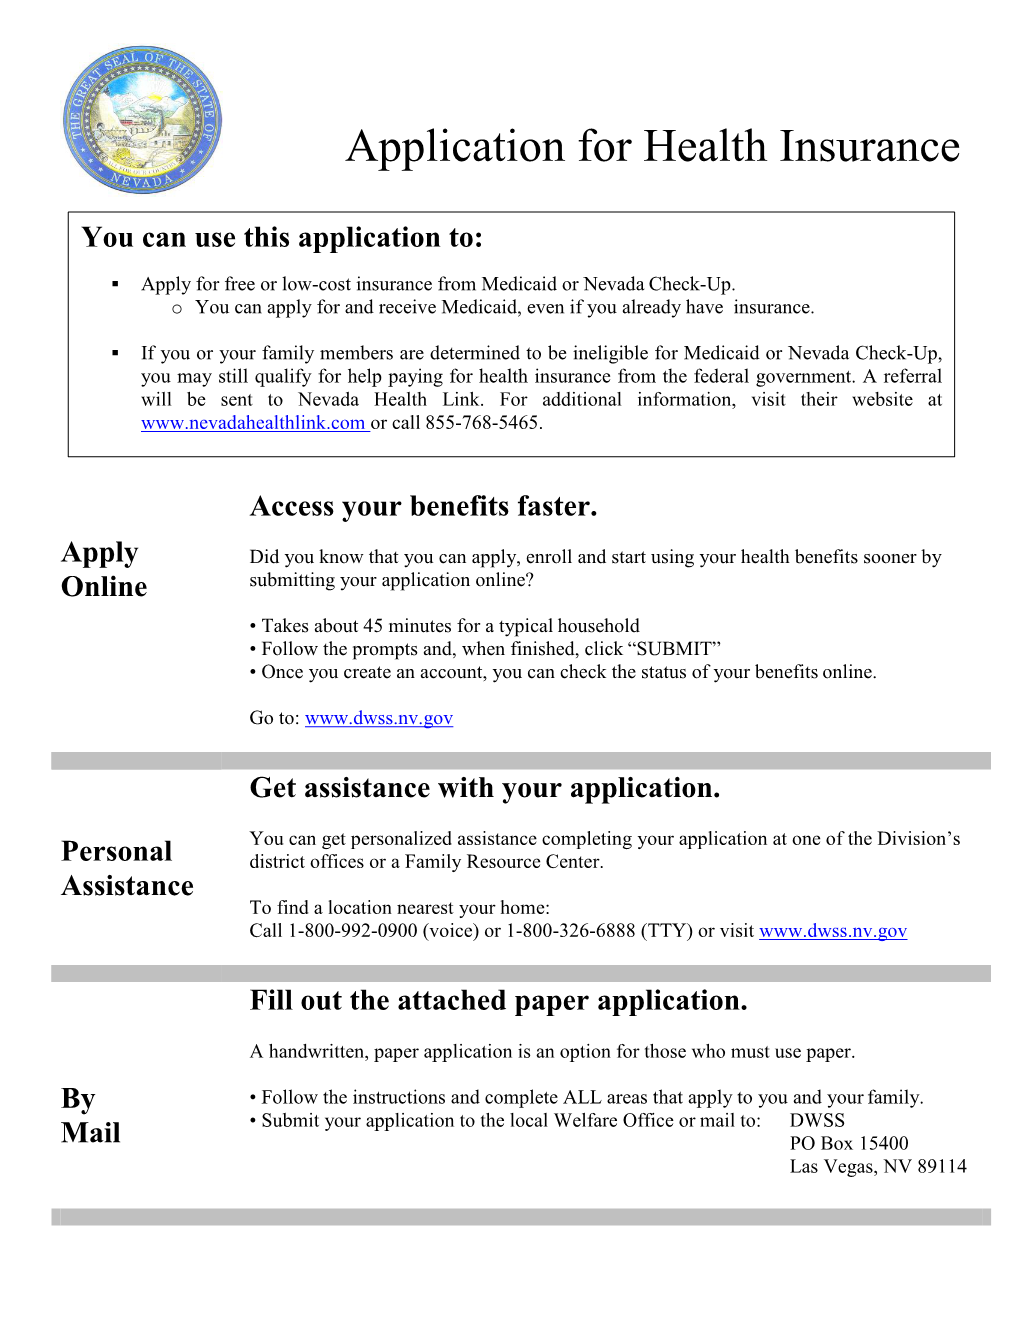 Application for Health Insurance